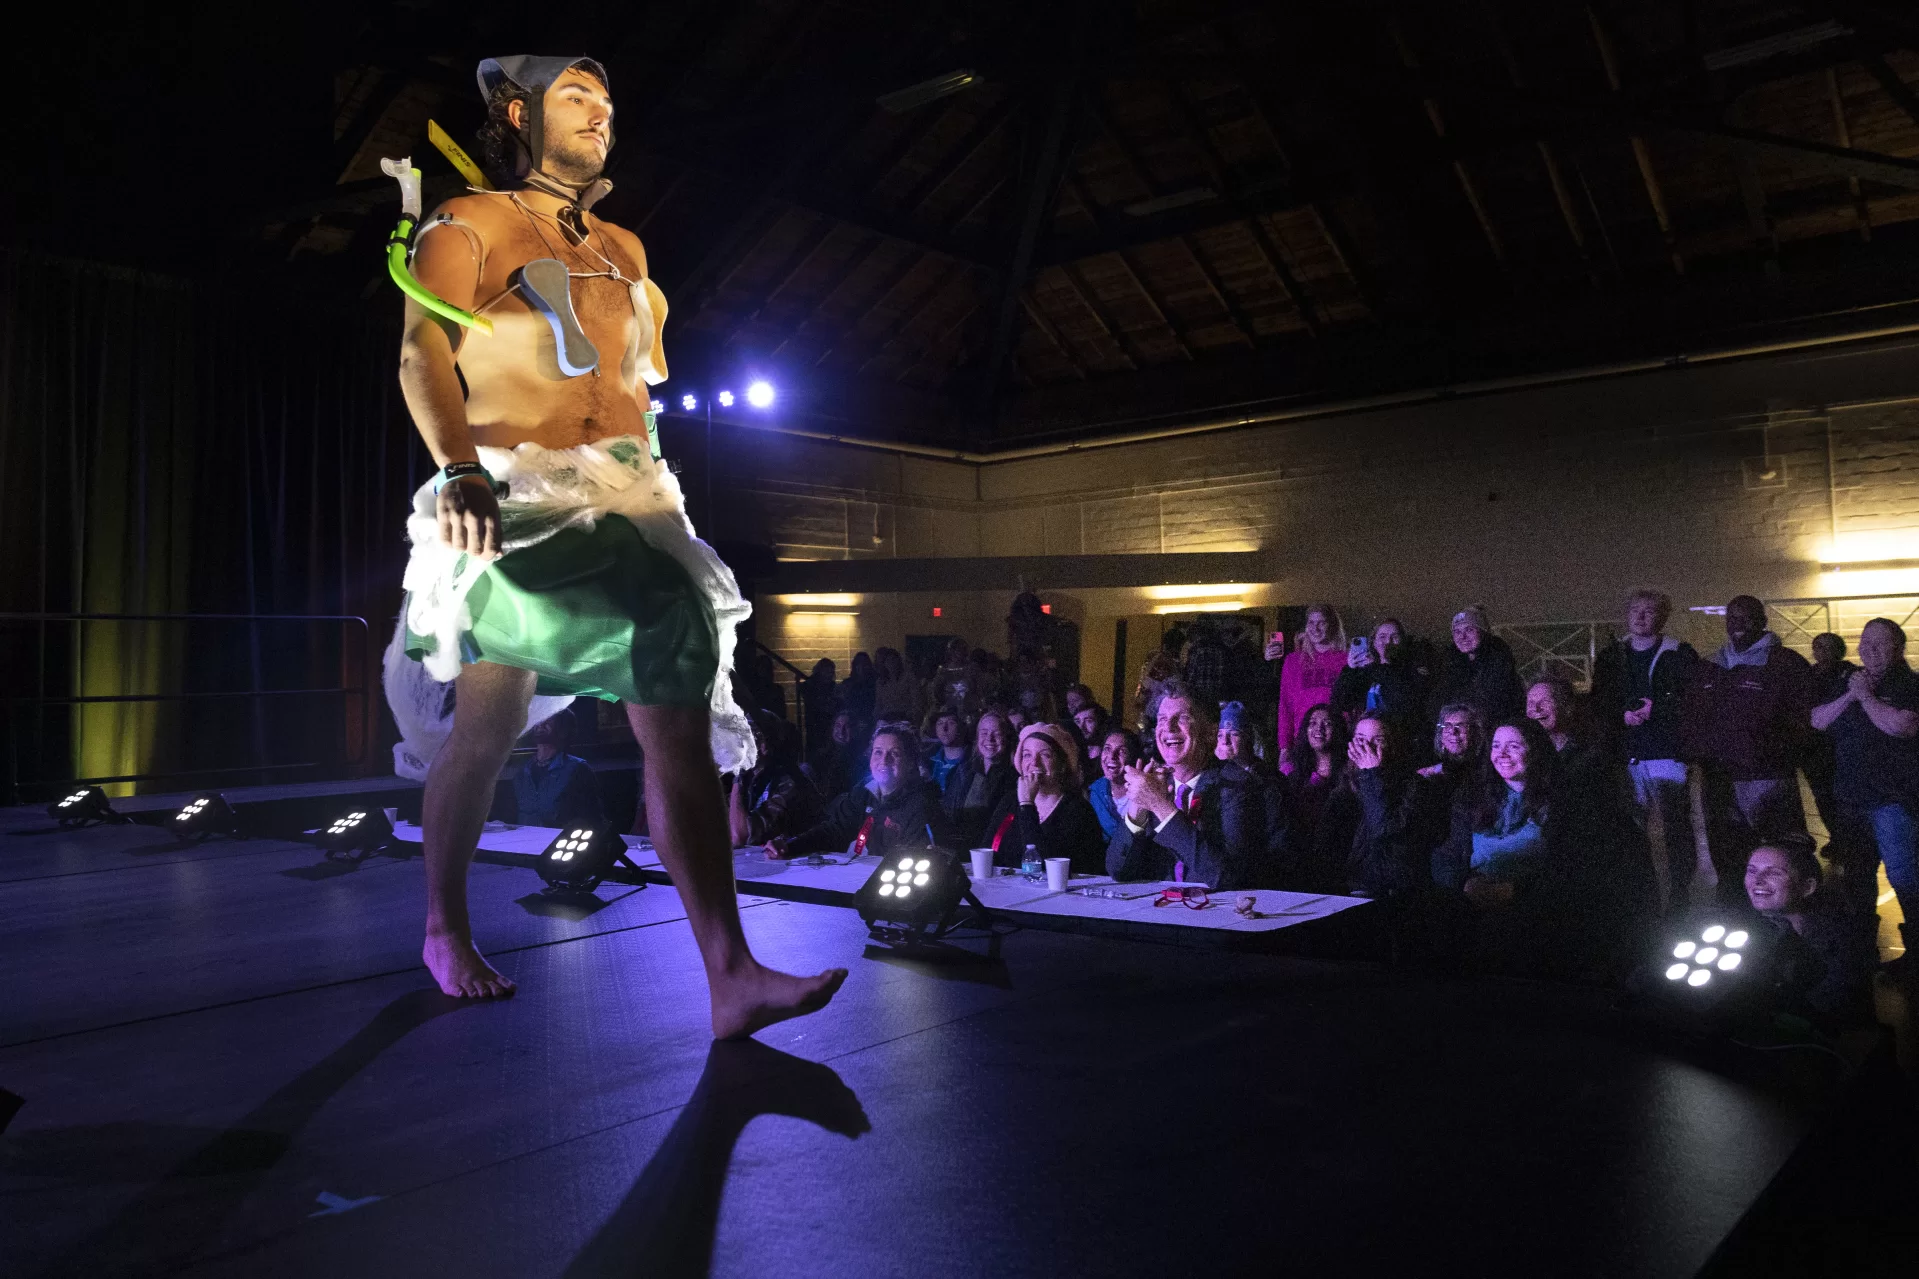 The annual Trashion Show, a fully in-person event for the first time since 209, was held on Nov. 16, 2022, in the Gray Athletic Building. (Phylllis Graber Jensen/Bates College)